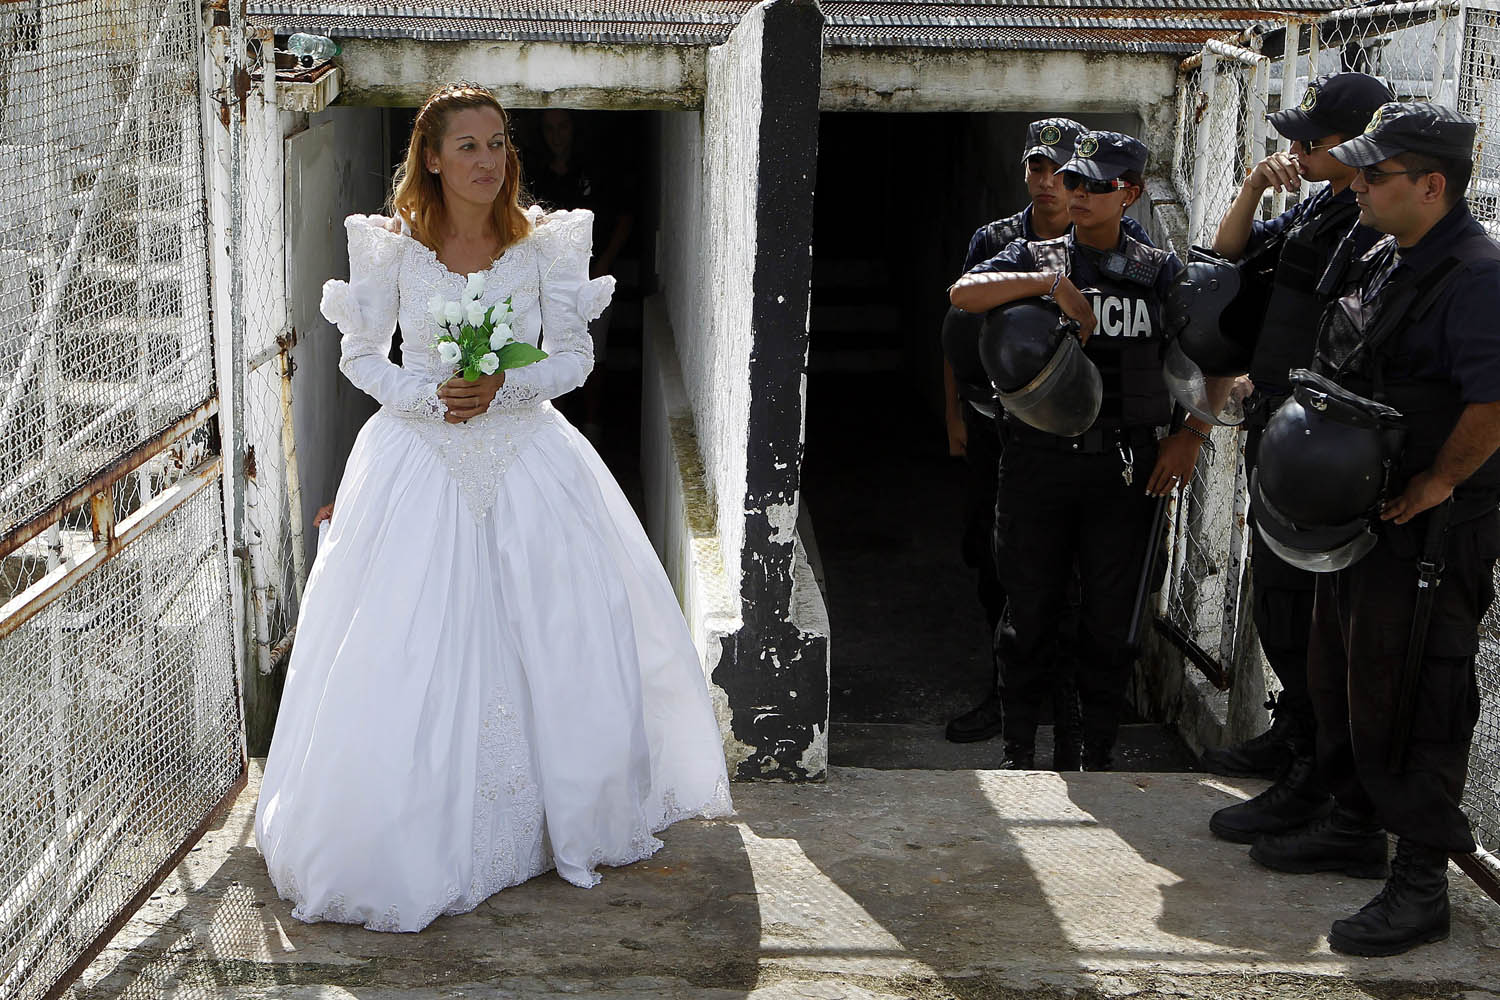 Supporter of Uruguayan soccer club Danubio marries at the stadium of the team